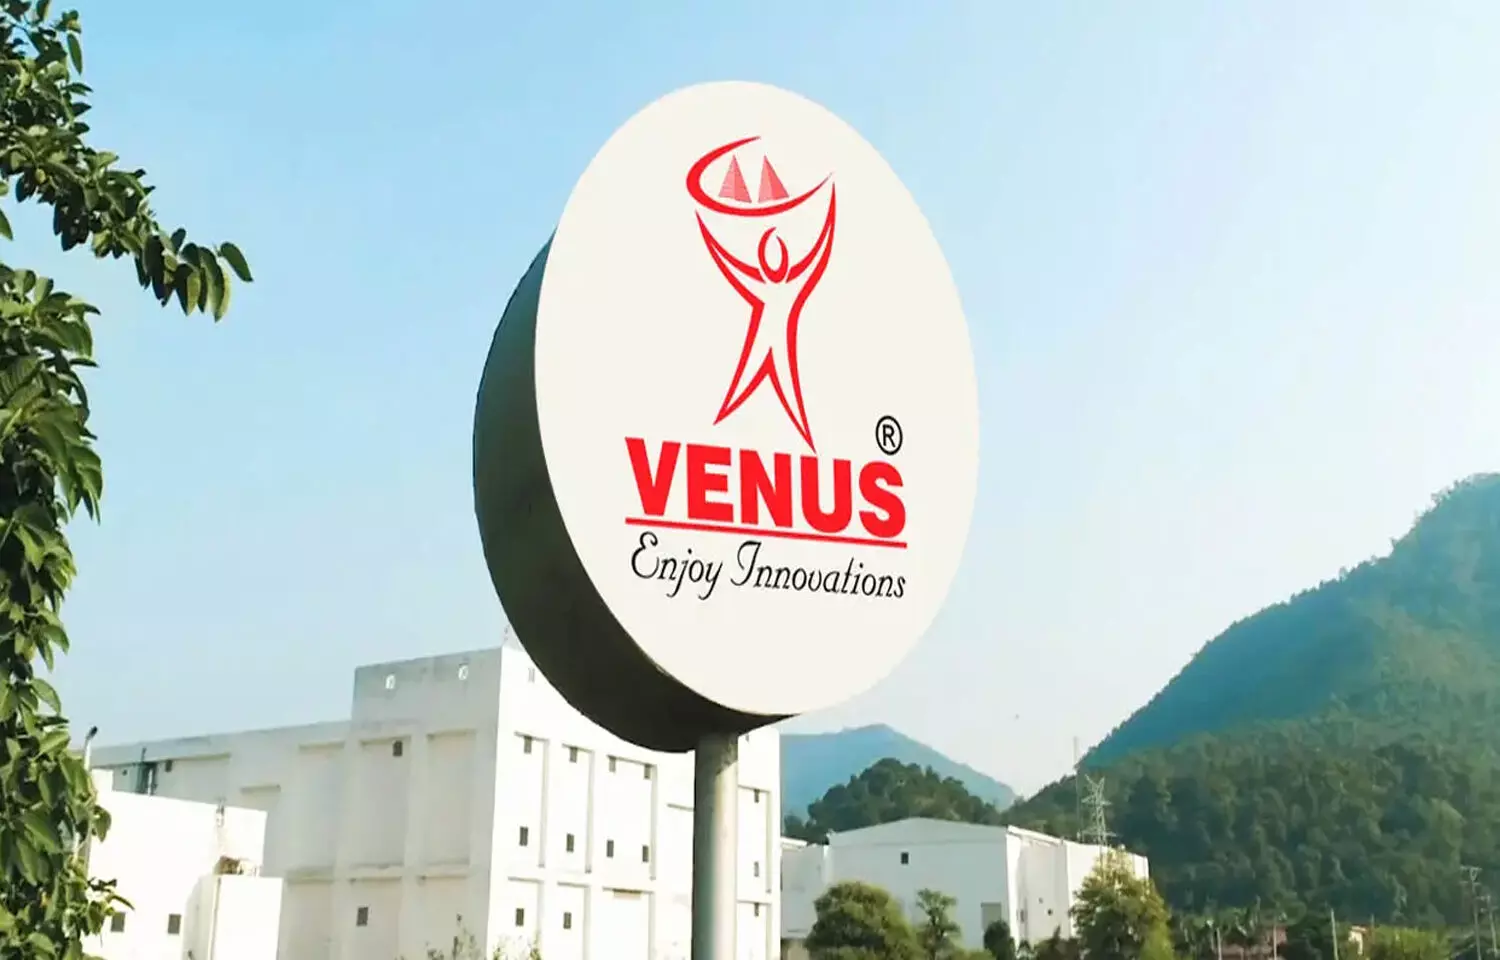 Venus Remedies gets GMP certification from Saudi Arabia for all production facilities in Baddi